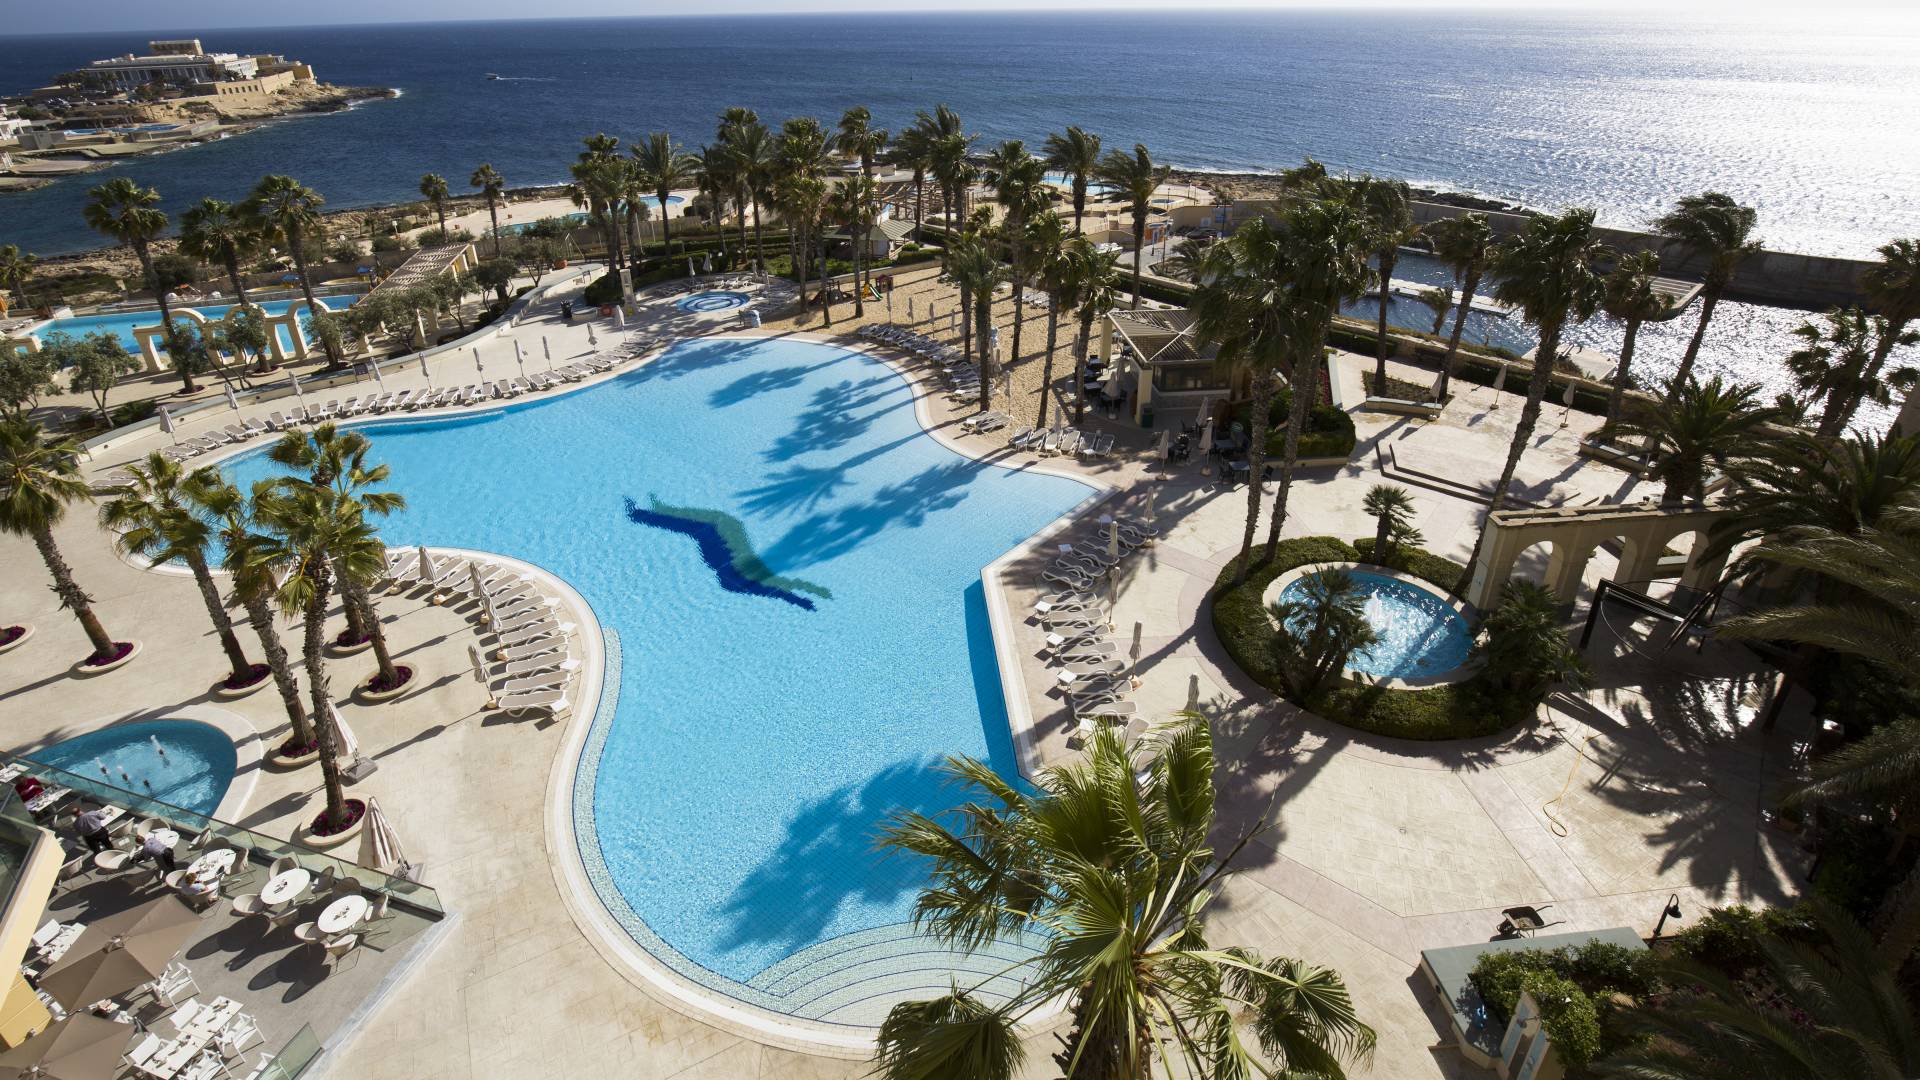 Aerial view of outdoor pool, palm trees and water view